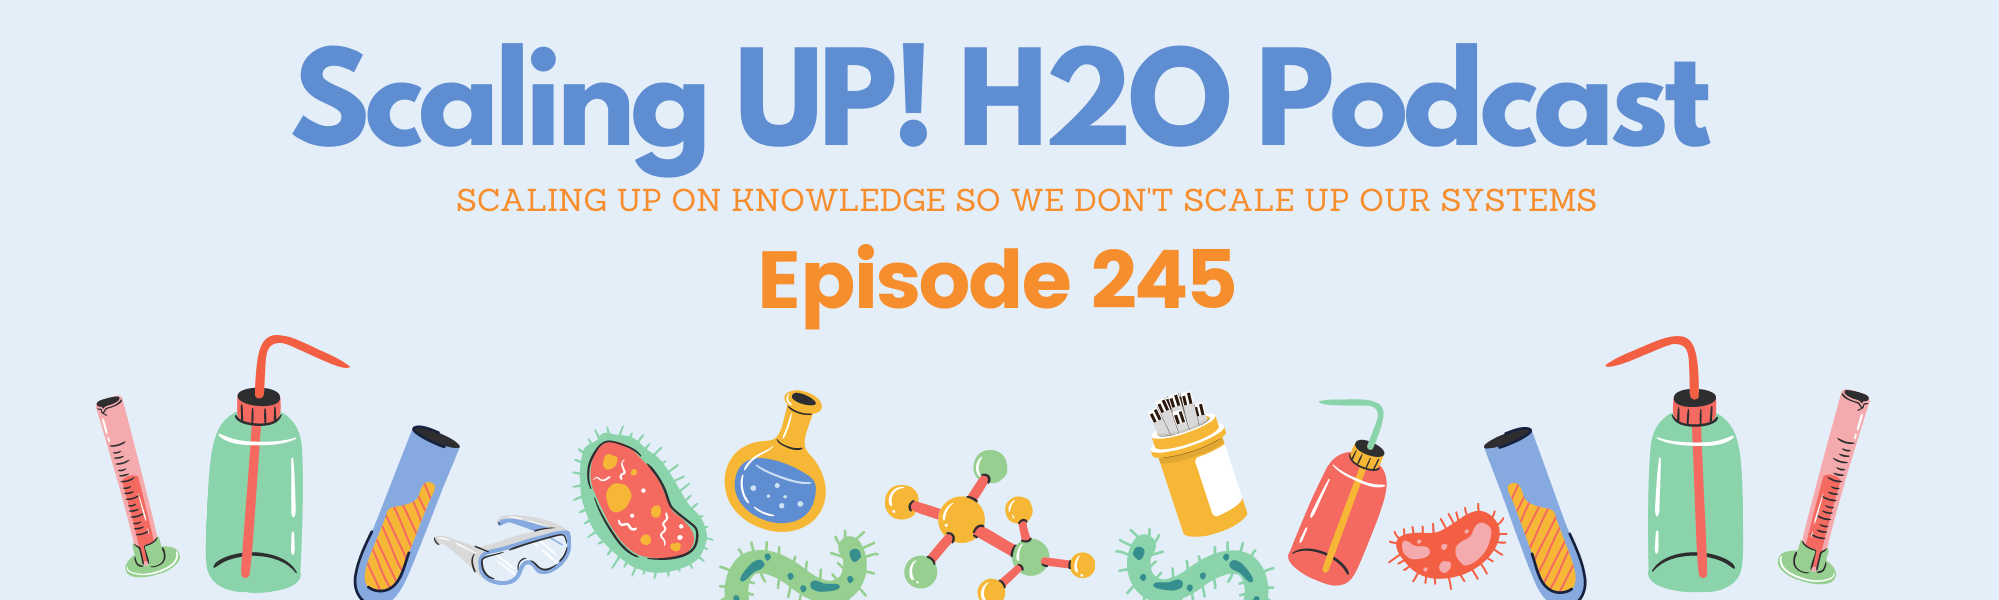 245 The One Where We Demystify Marketing - Scaling UP! H2O